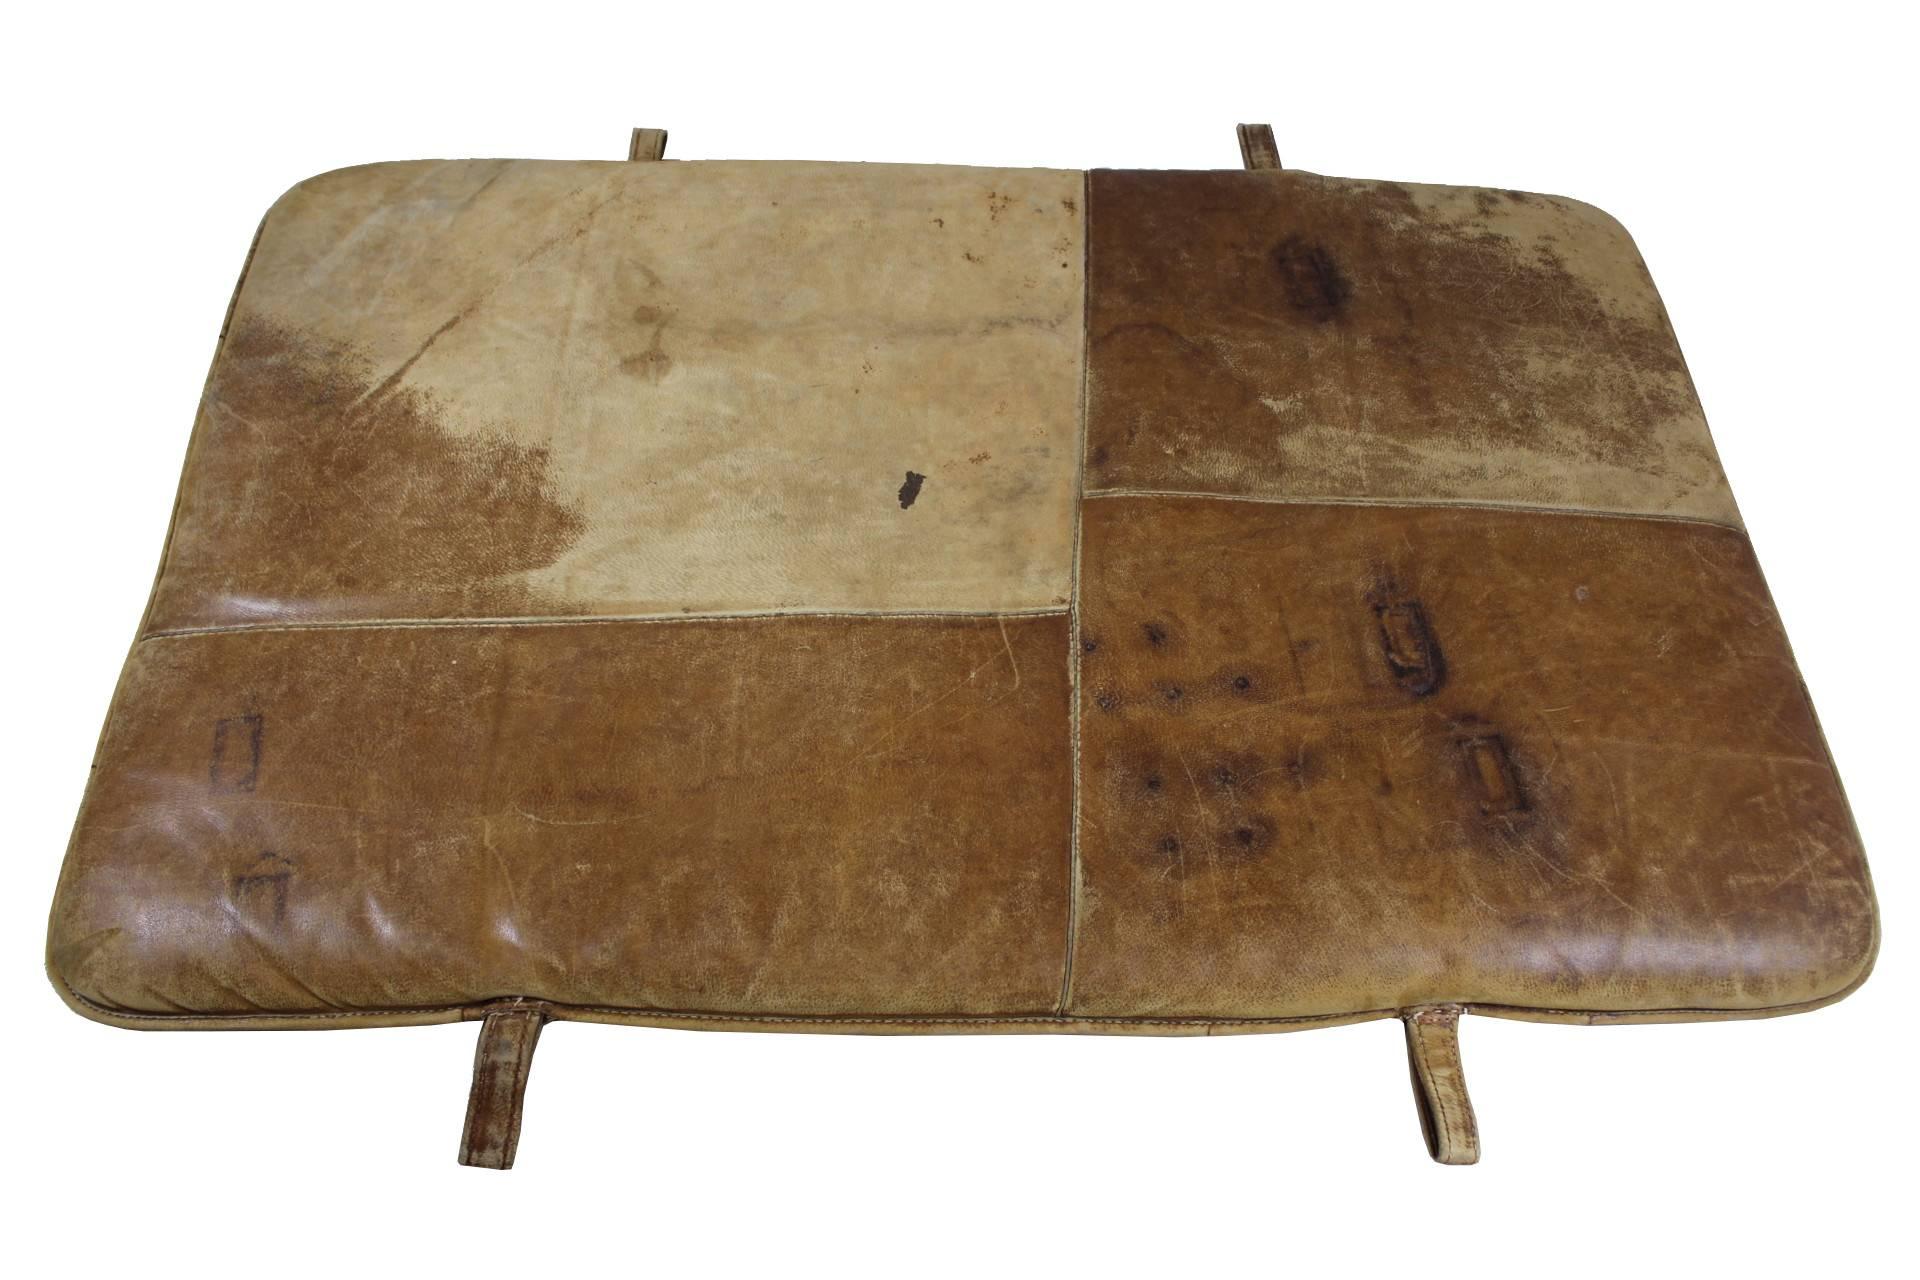 Gym mat from the 1920s, made from thick leather.